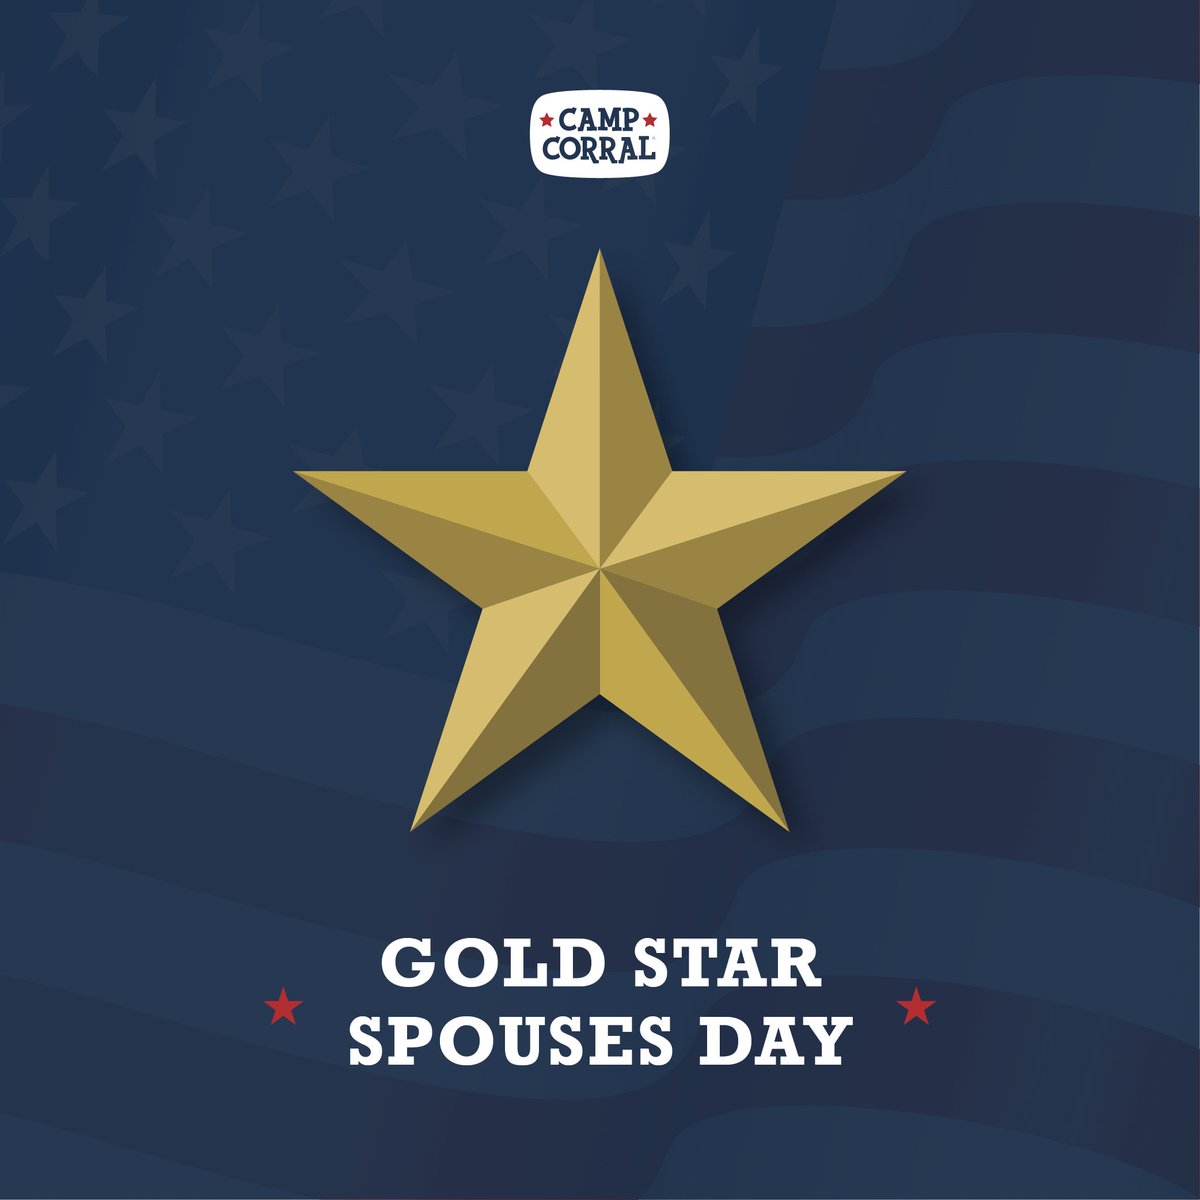 Our nation's Gold Star Spouses are in our thoughts today and every day. We honor you and your loved ones who paid the ultimate price so we may live in peace.